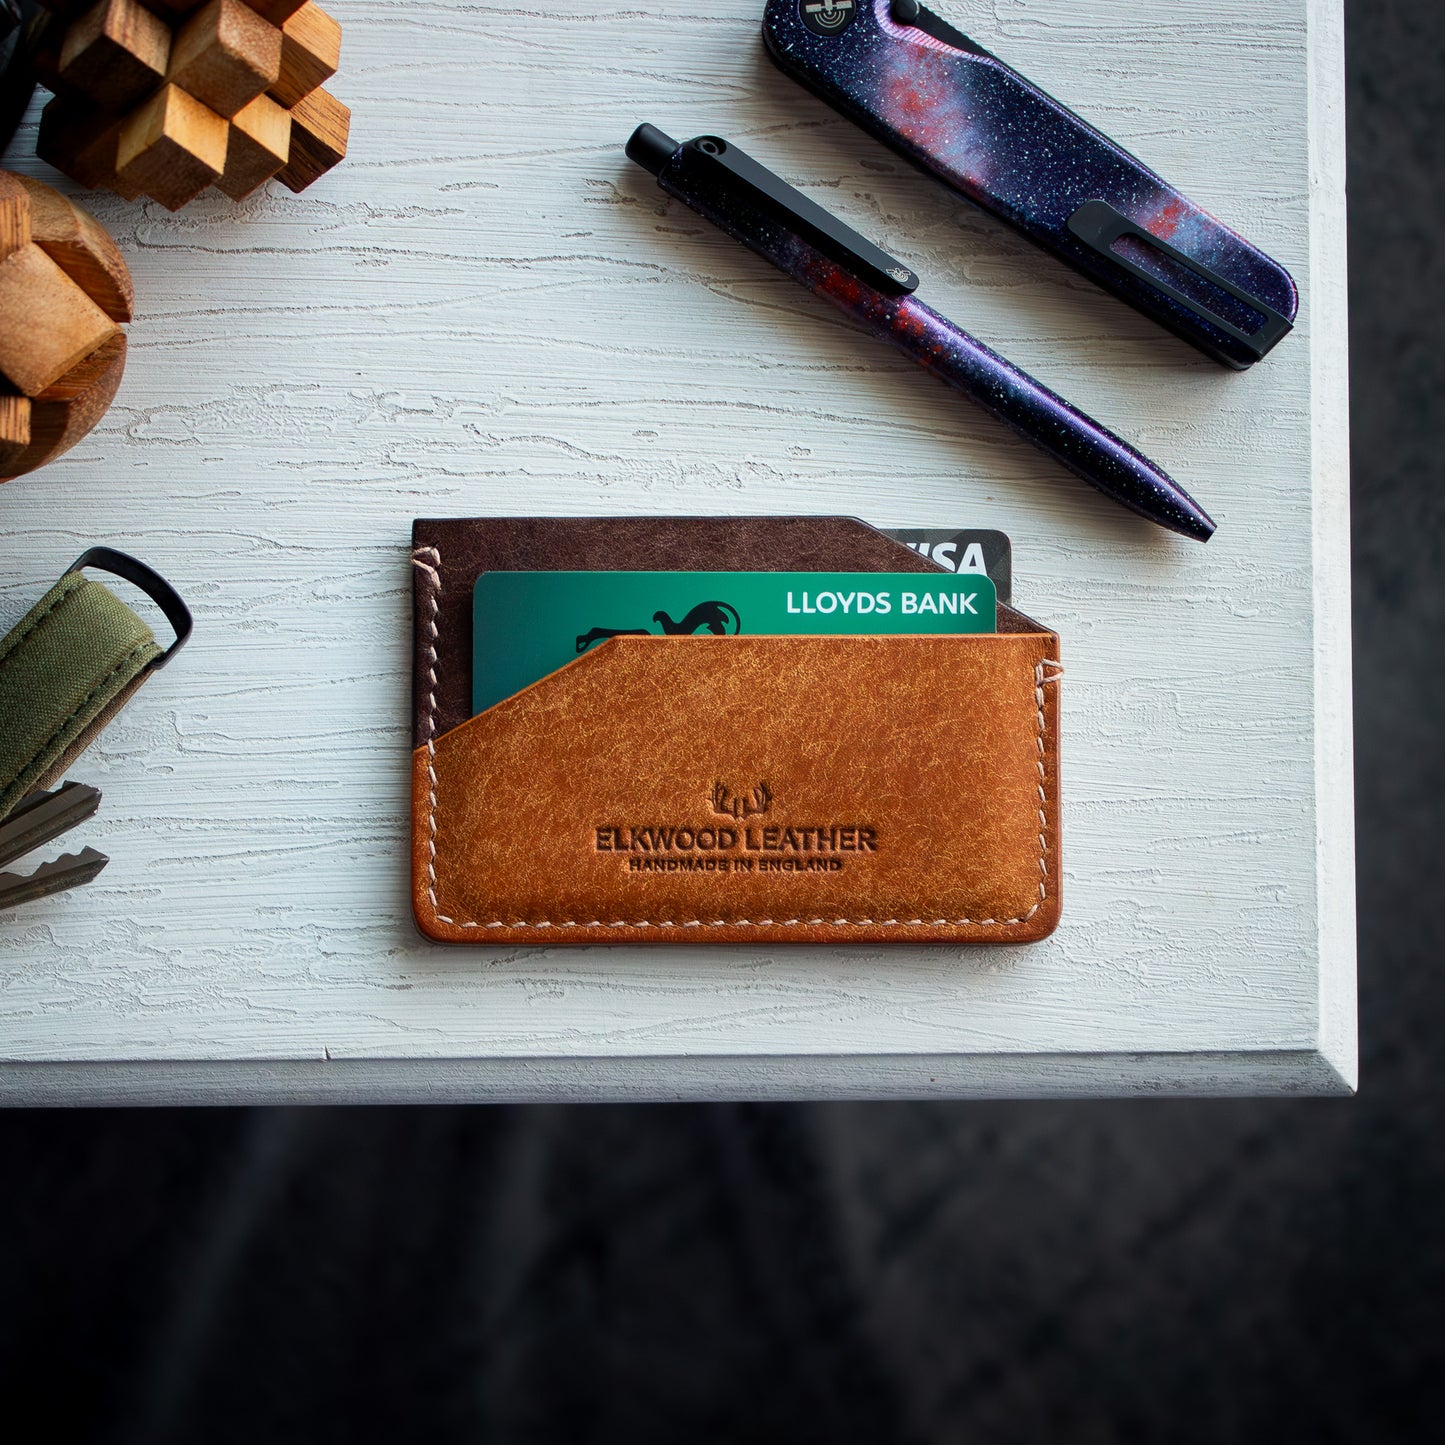 Elkwood Leather - The Aspen - minimalist full grain Italian Pueblo leather cardholder wallet with credit cards on white wooden table next to galaxy pen and knife and keys